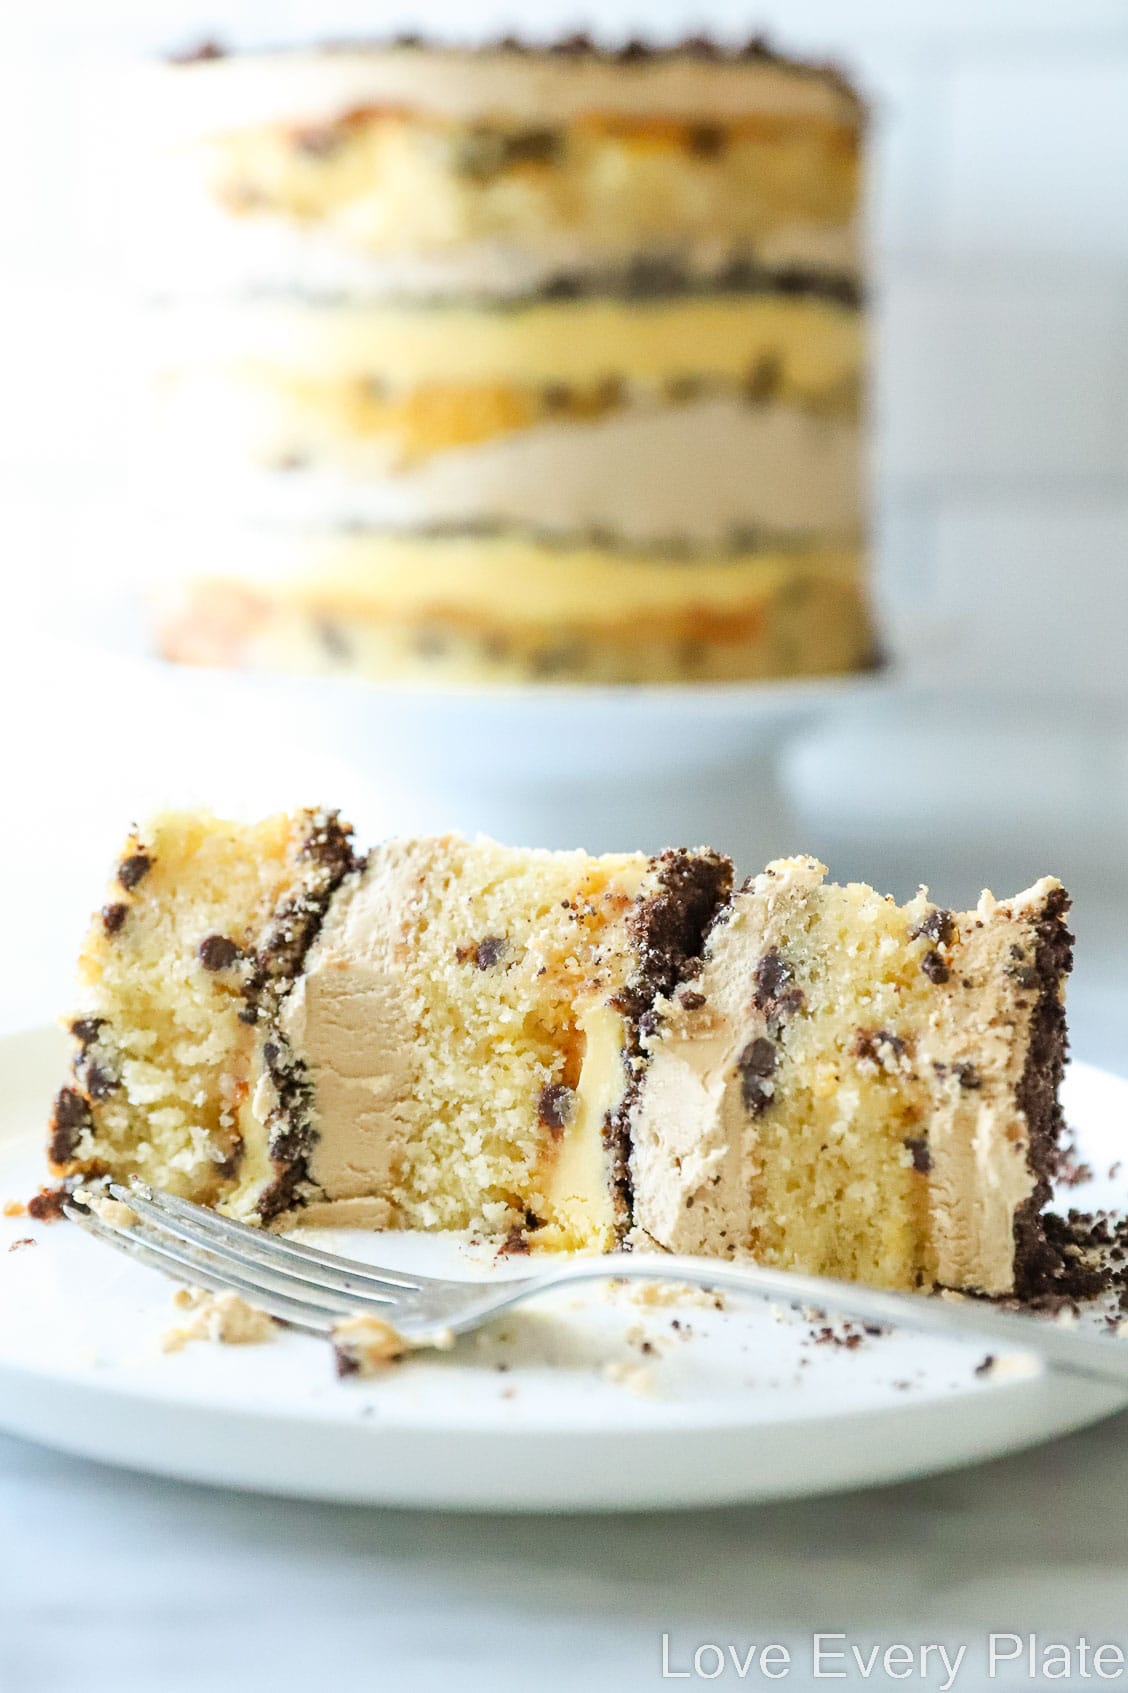 Chocolate Chip Layer Cake With Passionfruit Love Every Plate